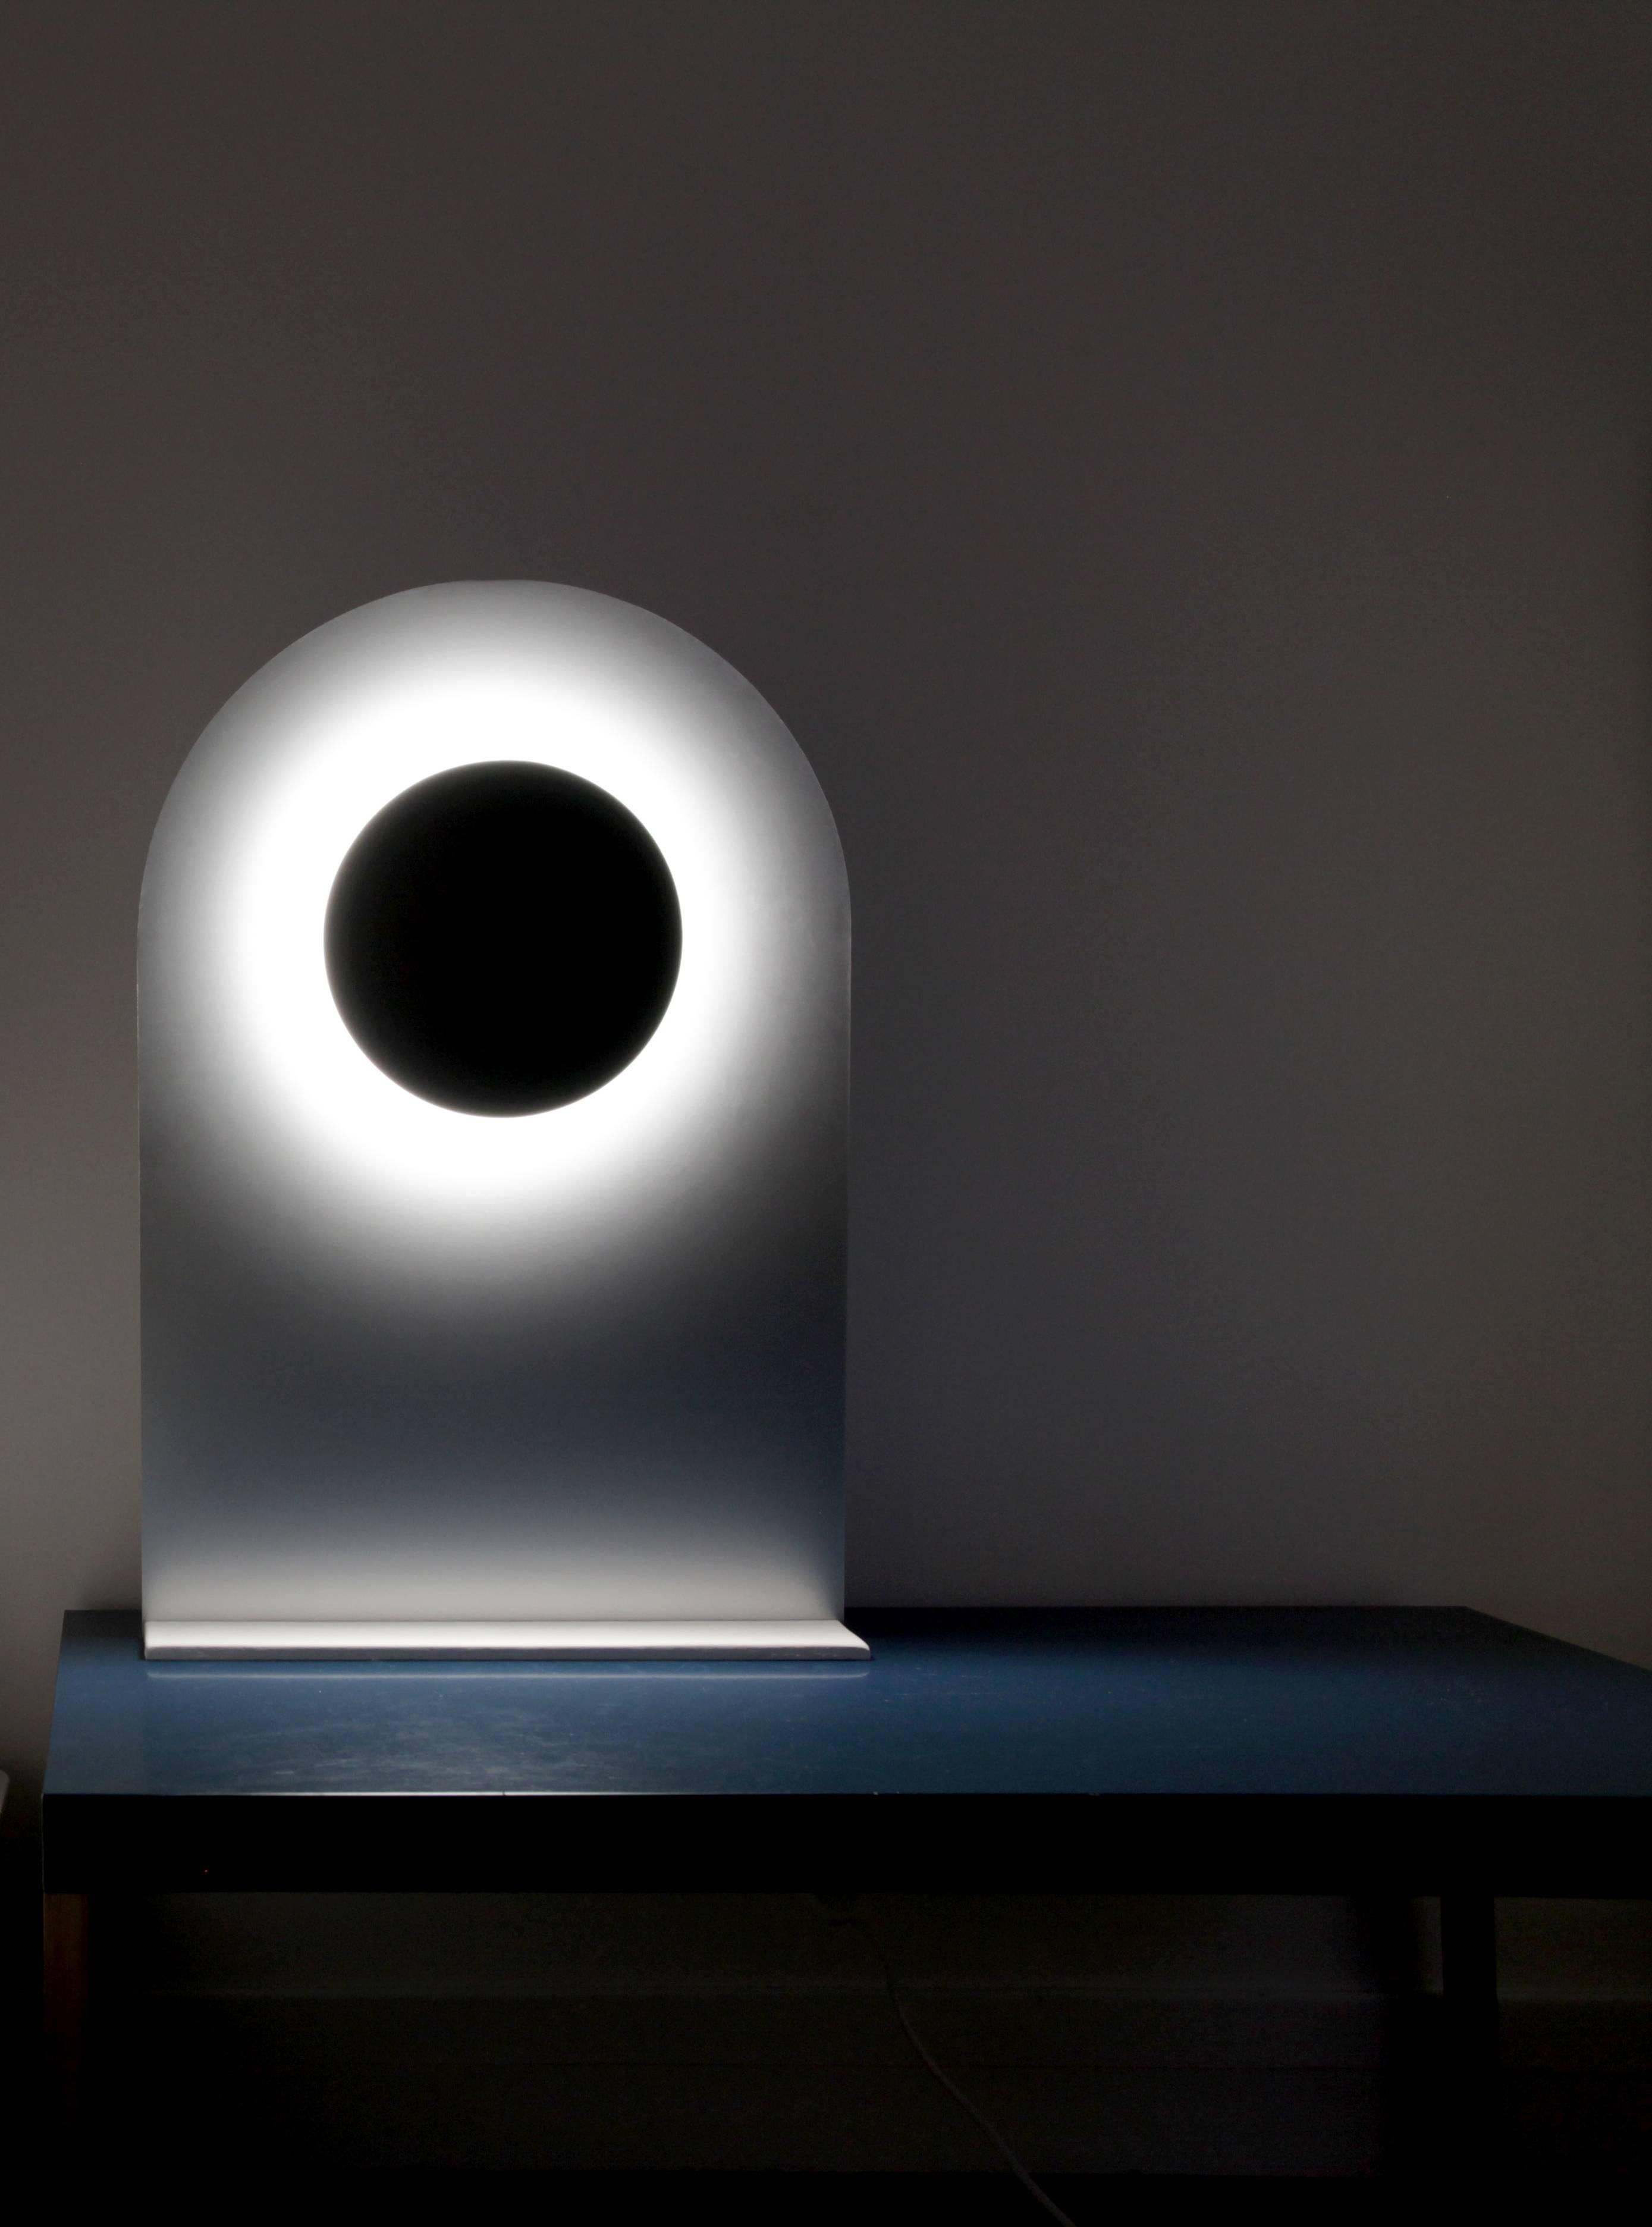 Eclipse Table Lamp by Arturo Erbsman
Handcrafted design artwork by Arturo Erbsman
Limited Edition, Signed and numbered
Dimensions: 60 x 39 x 12 cm
Materials: anodized aluminum disc, mirror, LED spotlight, wood, recomposed stone base (Corian)

All